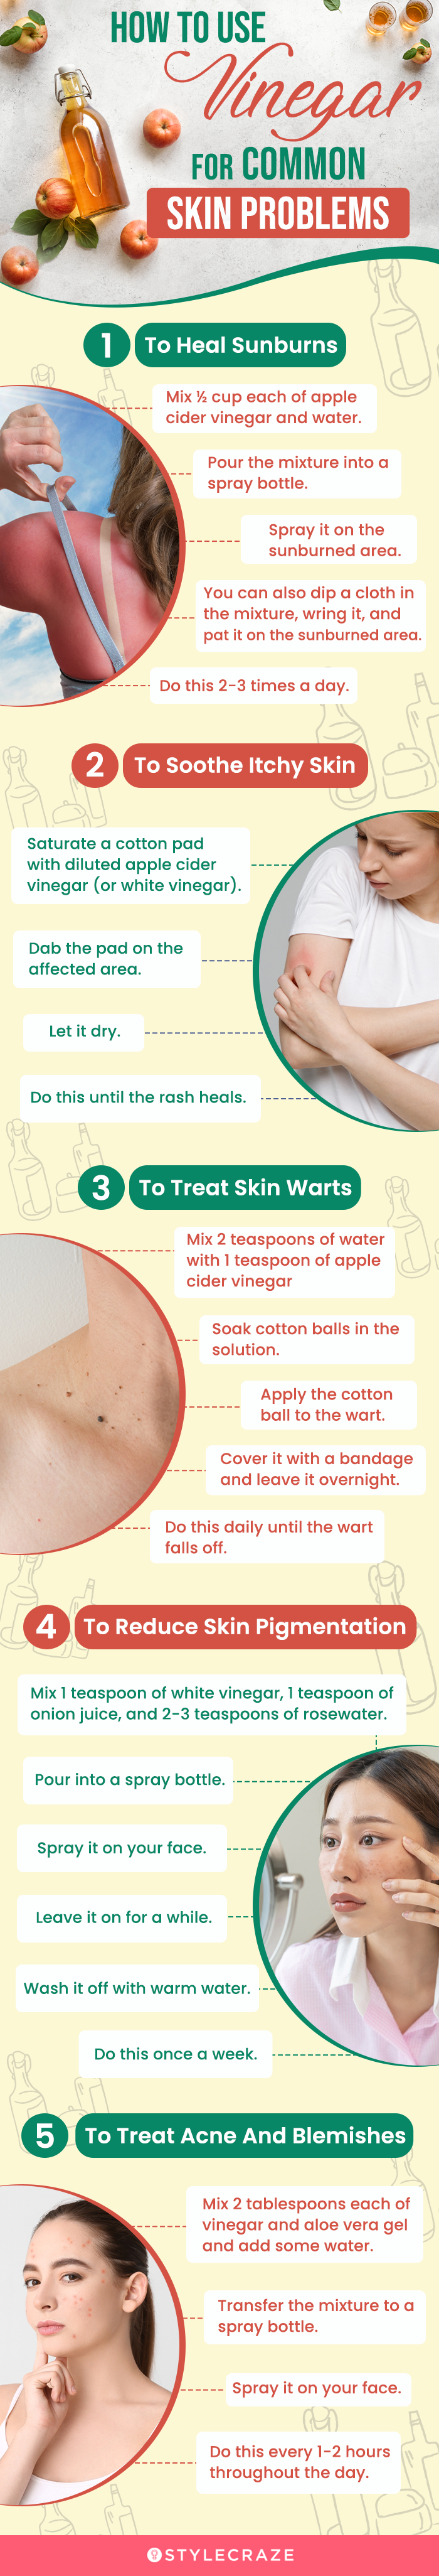 how to use vinegar for common skin problems (infographic)